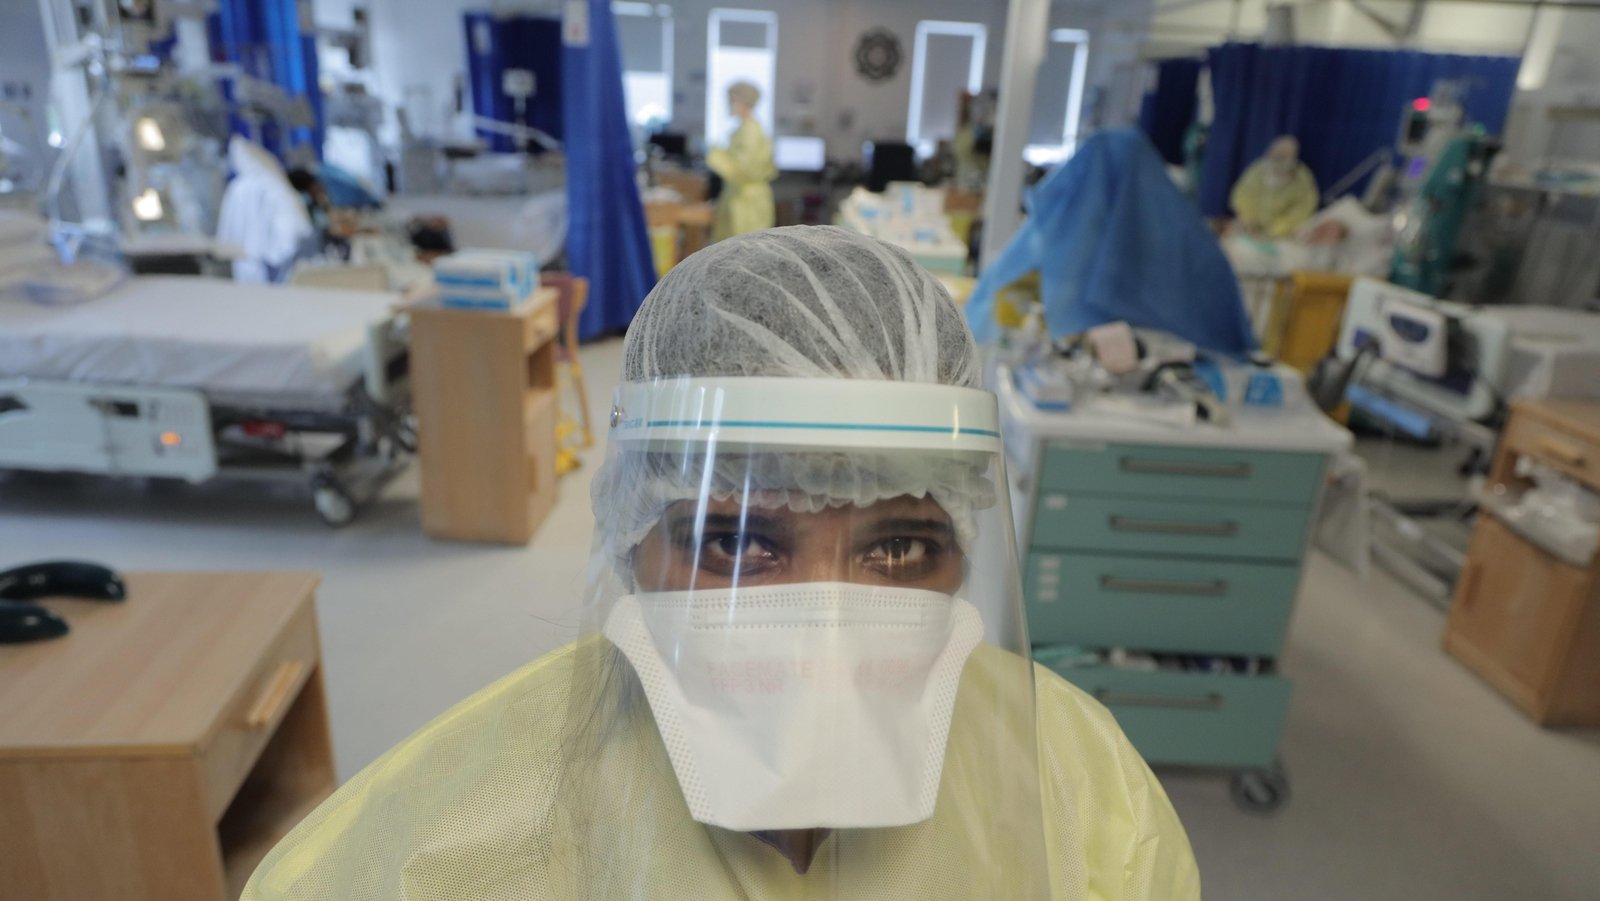 Image - A nurse on duty in the intensive care unit at St James's